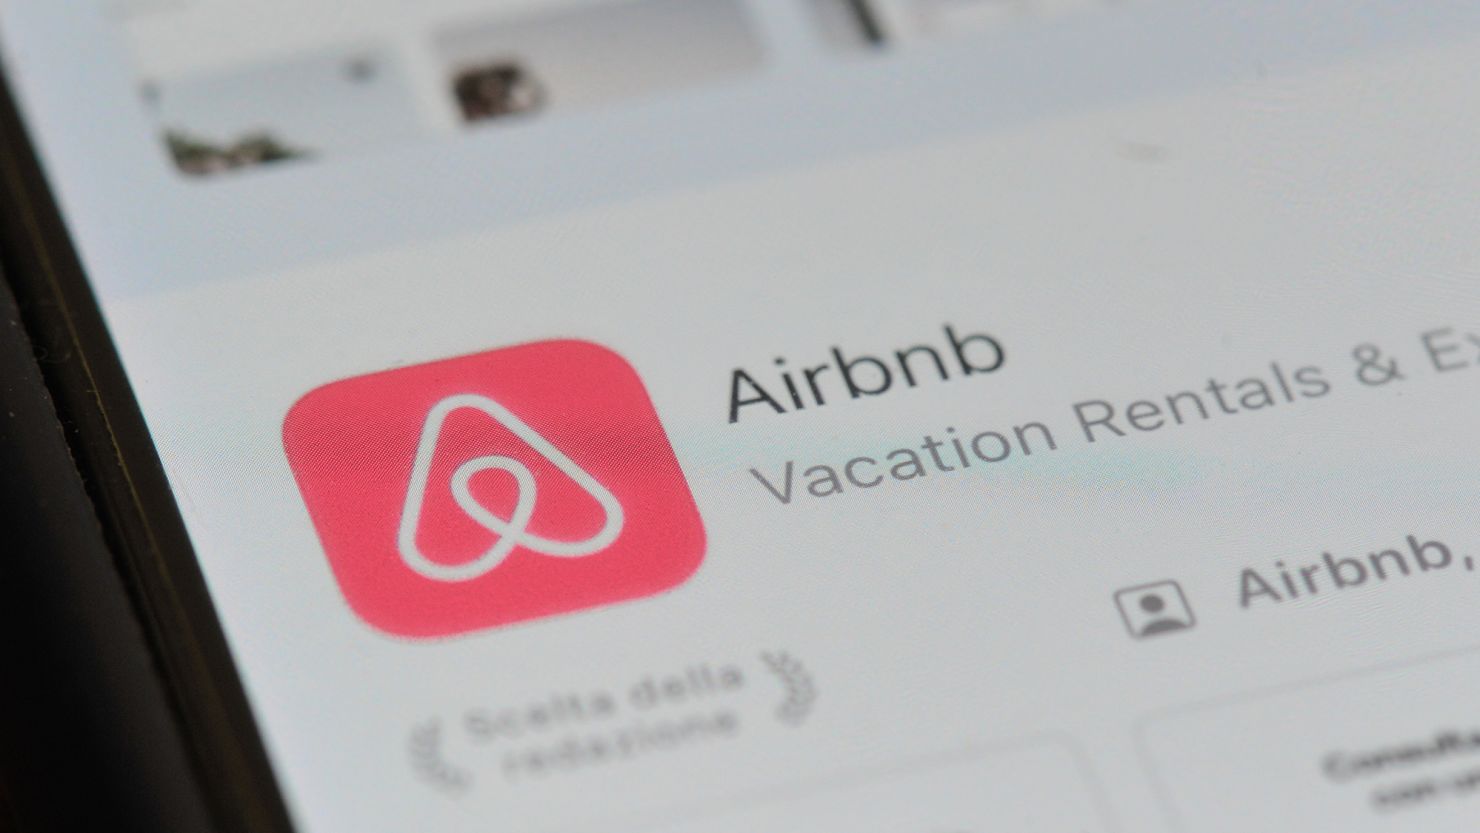 Airbnb hosts who currently have indoor security cameras have until April 30 to remove them.